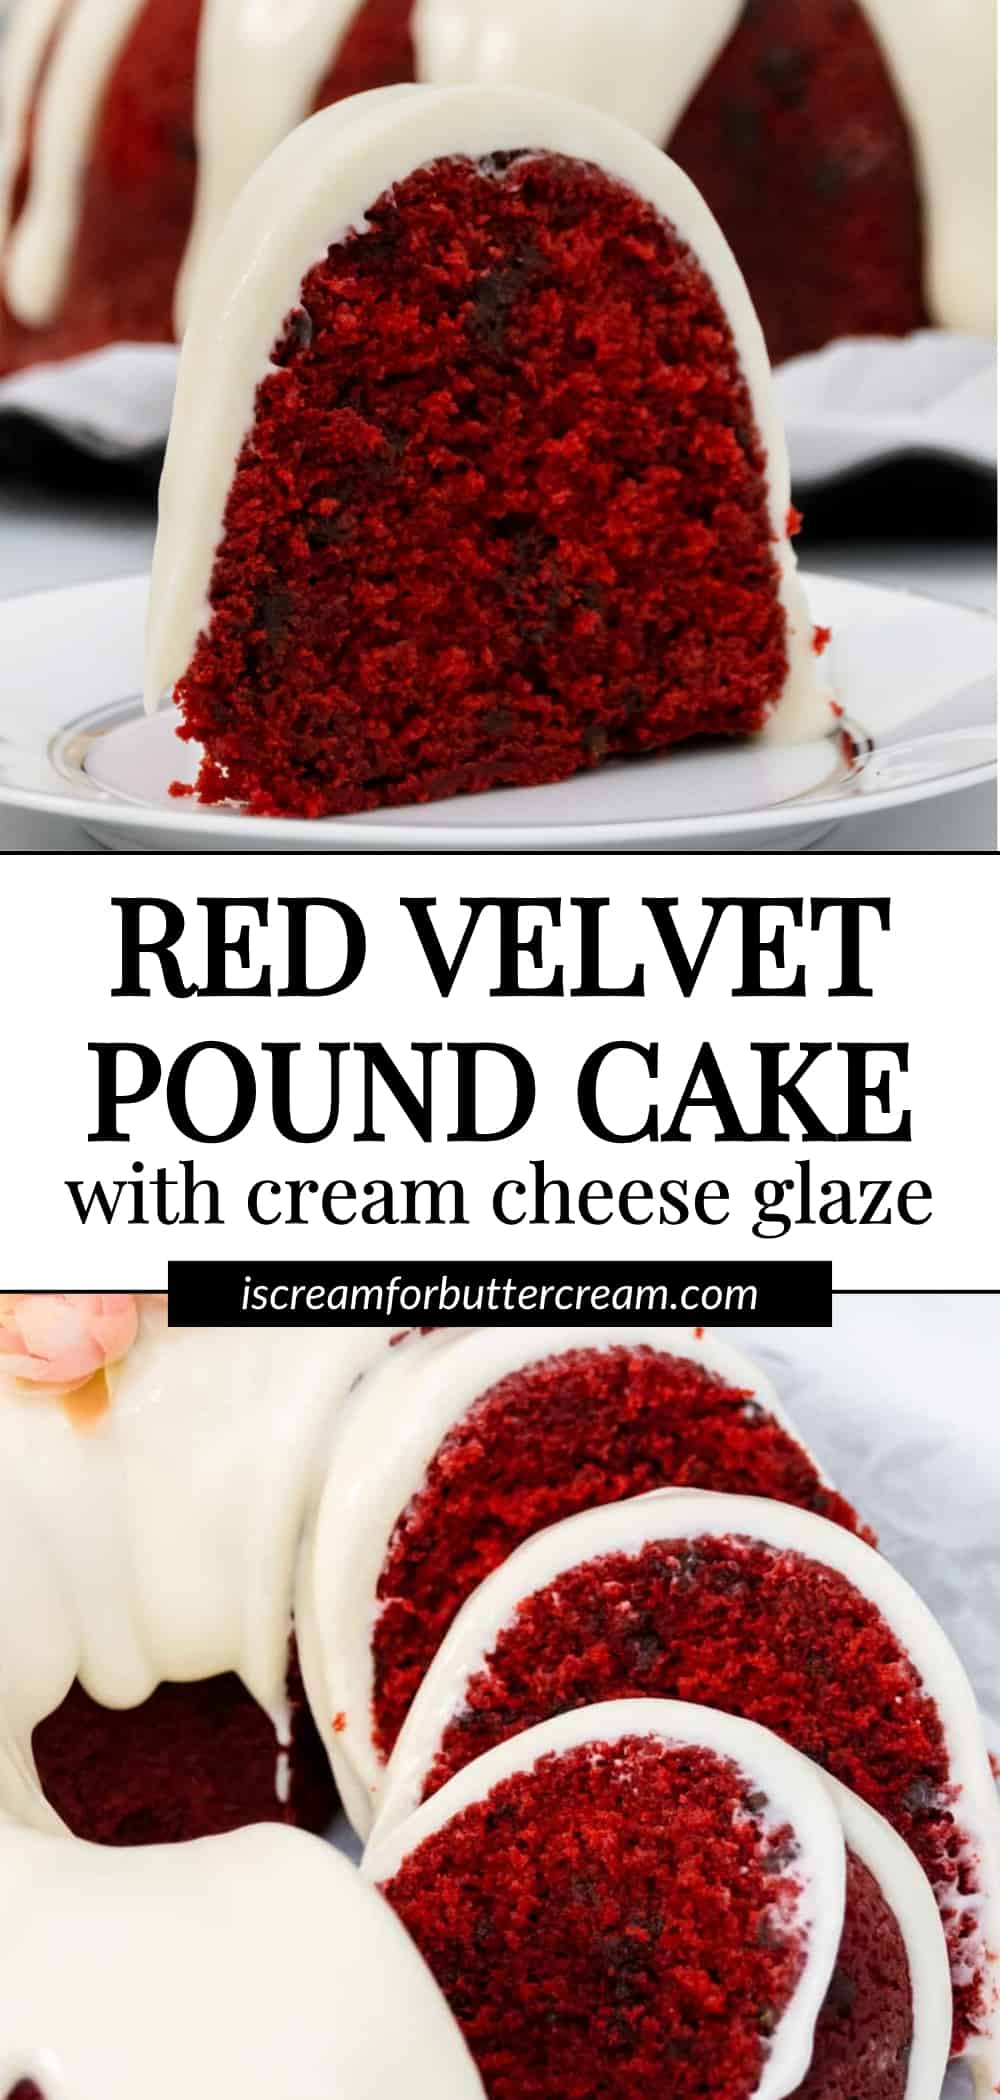 Two image collage with red velvet pound cake slices on white plates and text overlay.